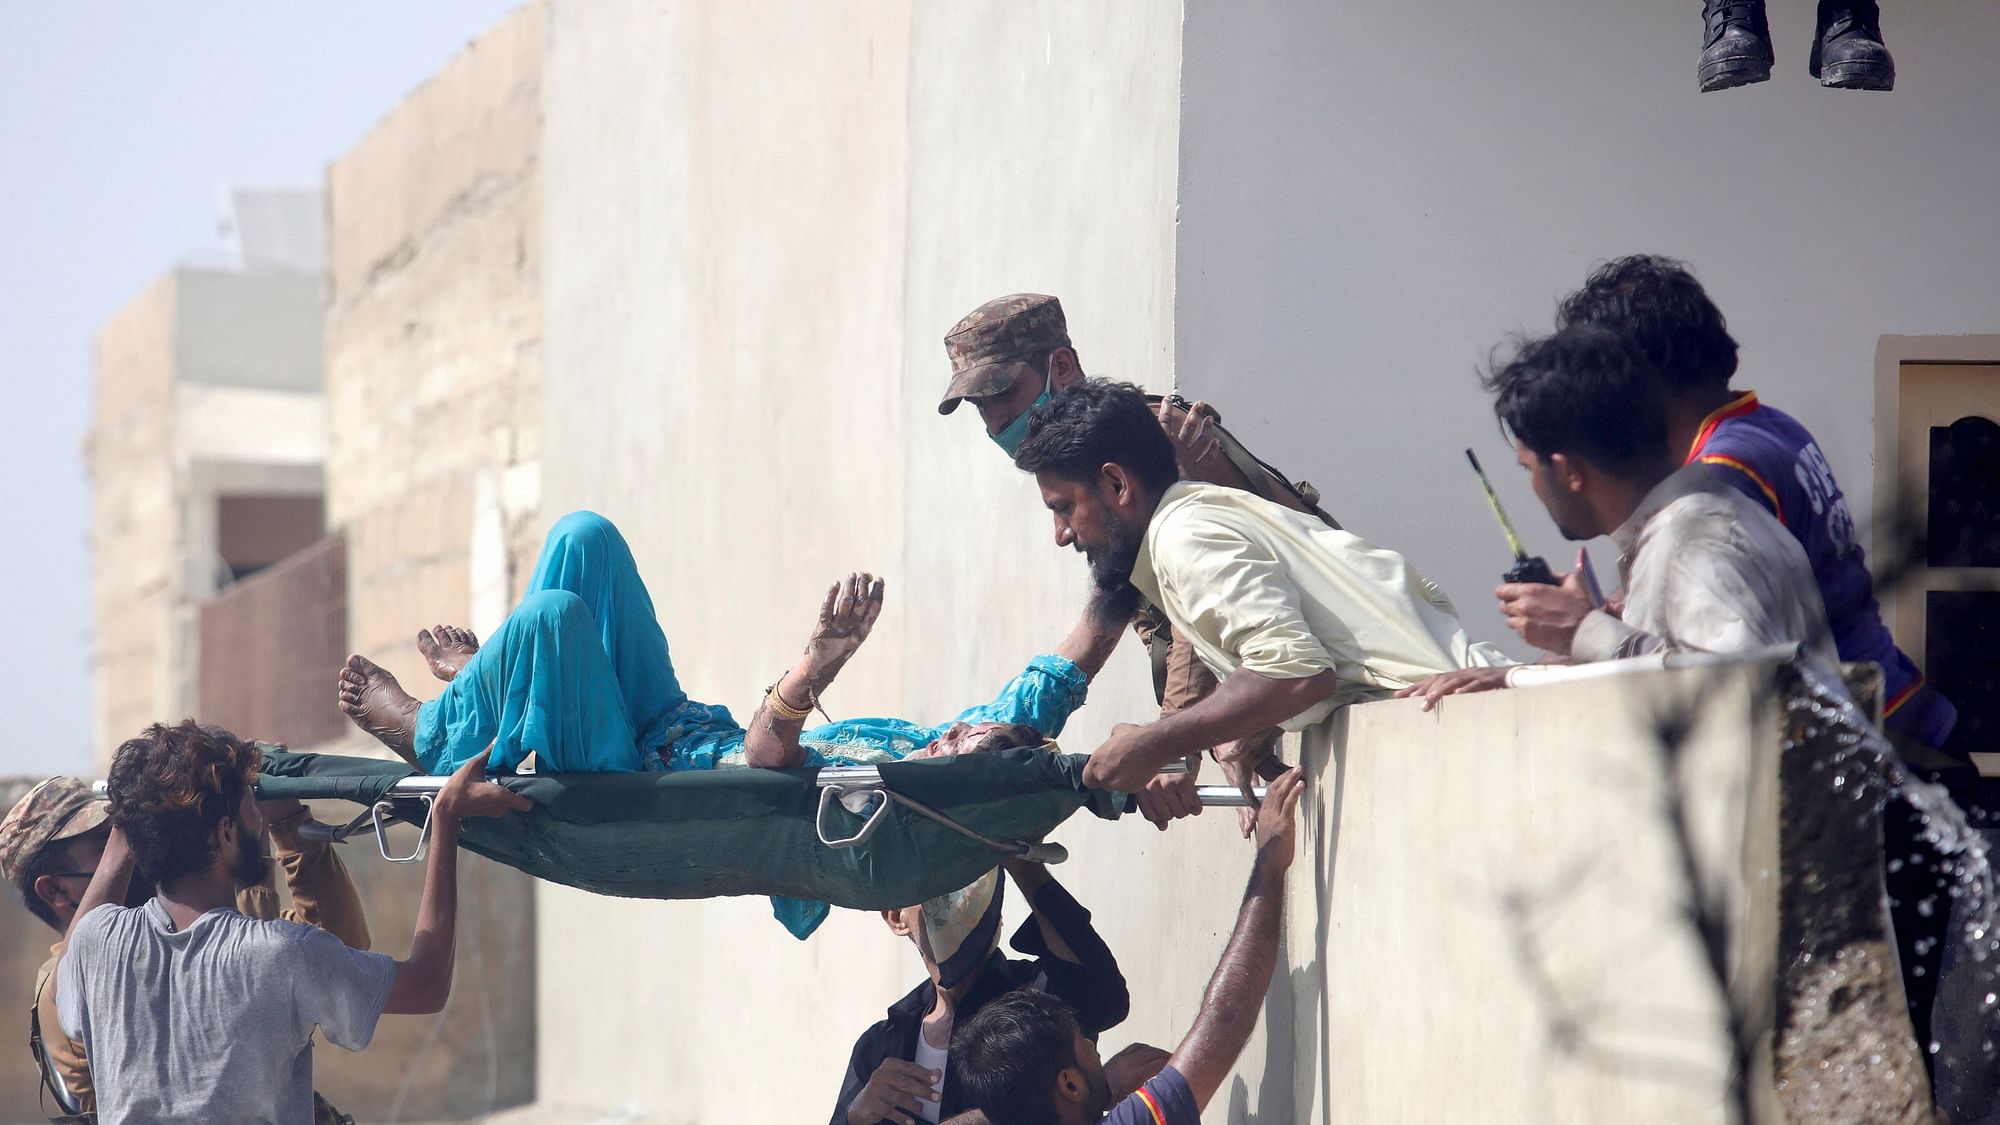 Volunteers carry an injured person at the site of a plane crash in Karachi, Pakistan, on 22 May.&nbsp;